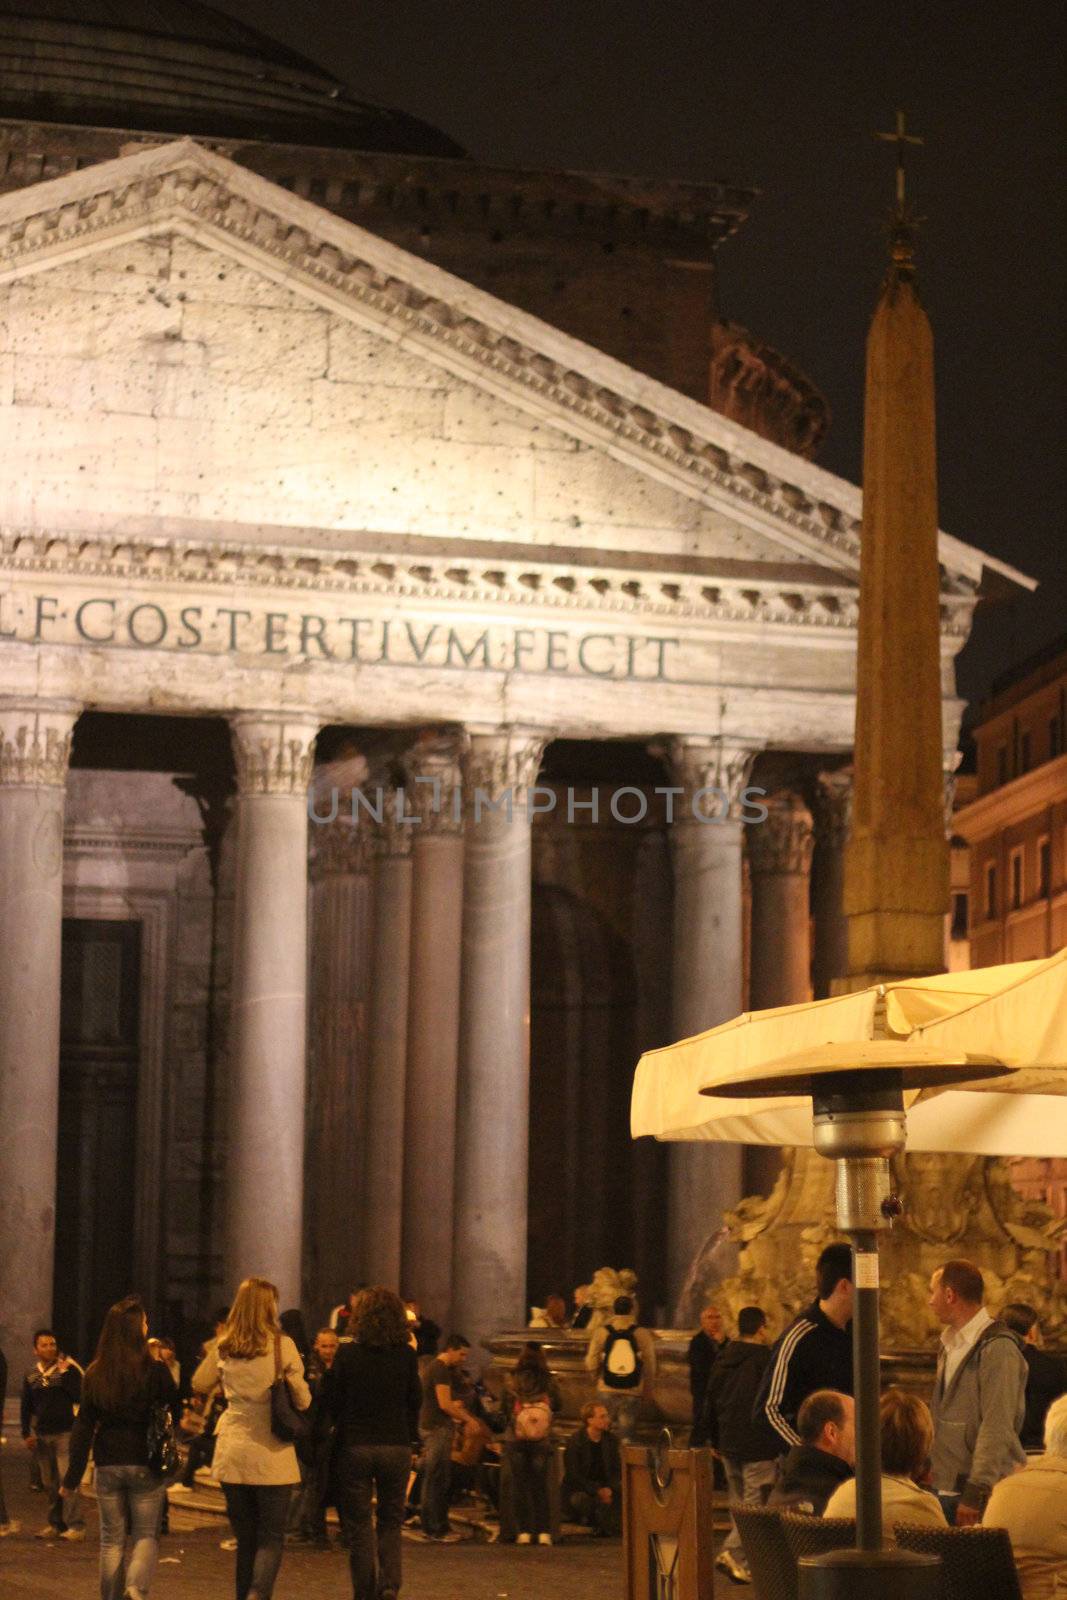 Piazza della Rotunda with Pantheon in the background in Rome, Italy at night, Rome, Italy - April 2011

A busy Piazza at all hours of the day in the very heart of Rome's historical city. 